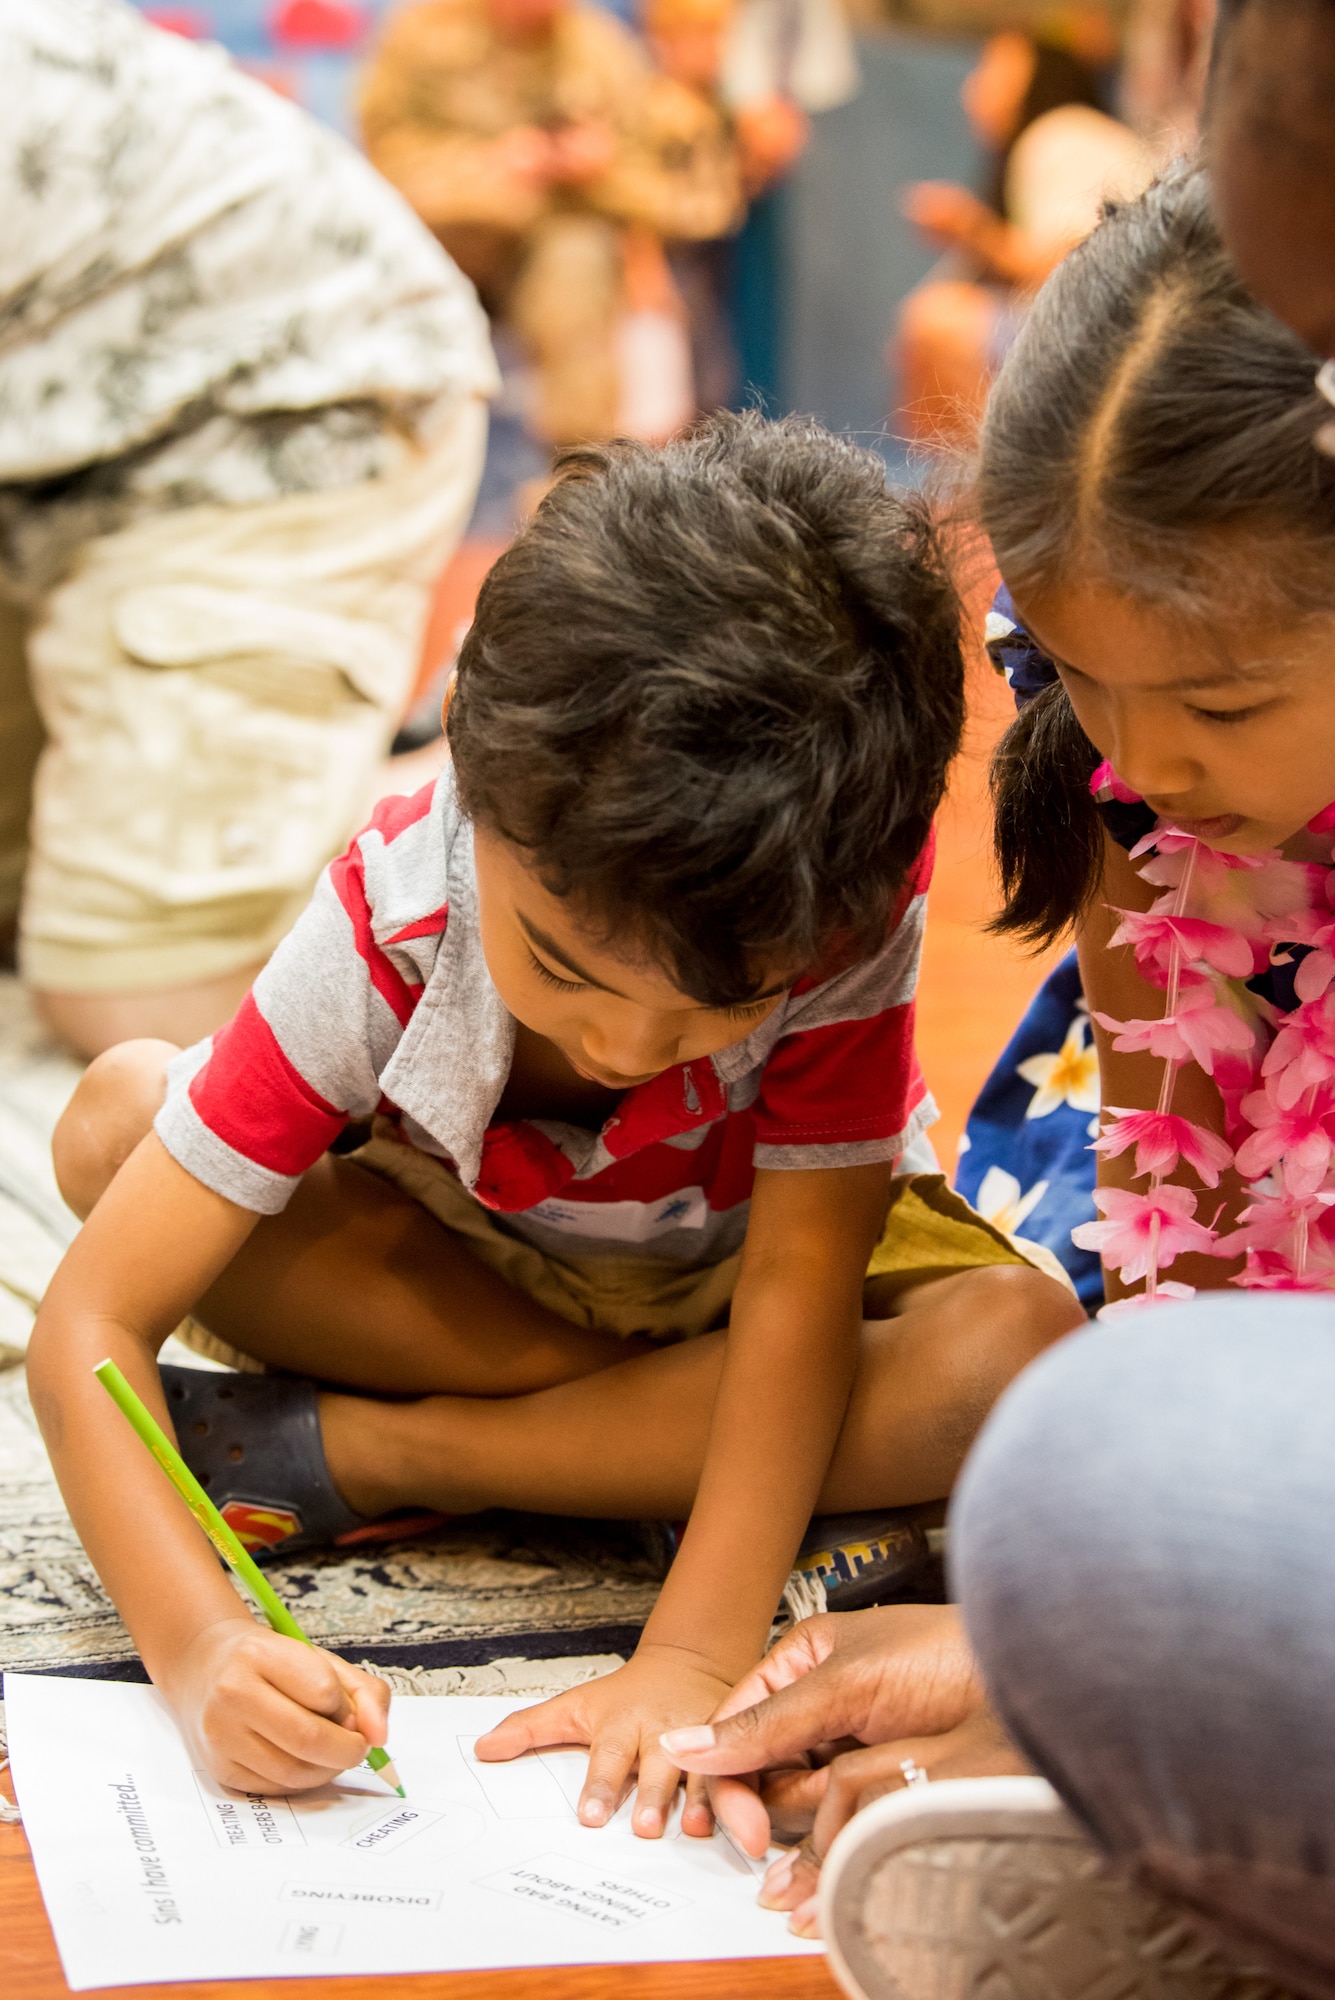 Children of command-sponsored families participate in various activities during Vacation Bible School at Al Udeid Air Base, Qatar, May 25, 2018. The two-day event, hosted by the 379th Air Expeditionary Wing Chaplain Corps, integrated biblical lessons and team-building activities. (U.S. Air Force photo by Staff Sgt. Joshua Horton)